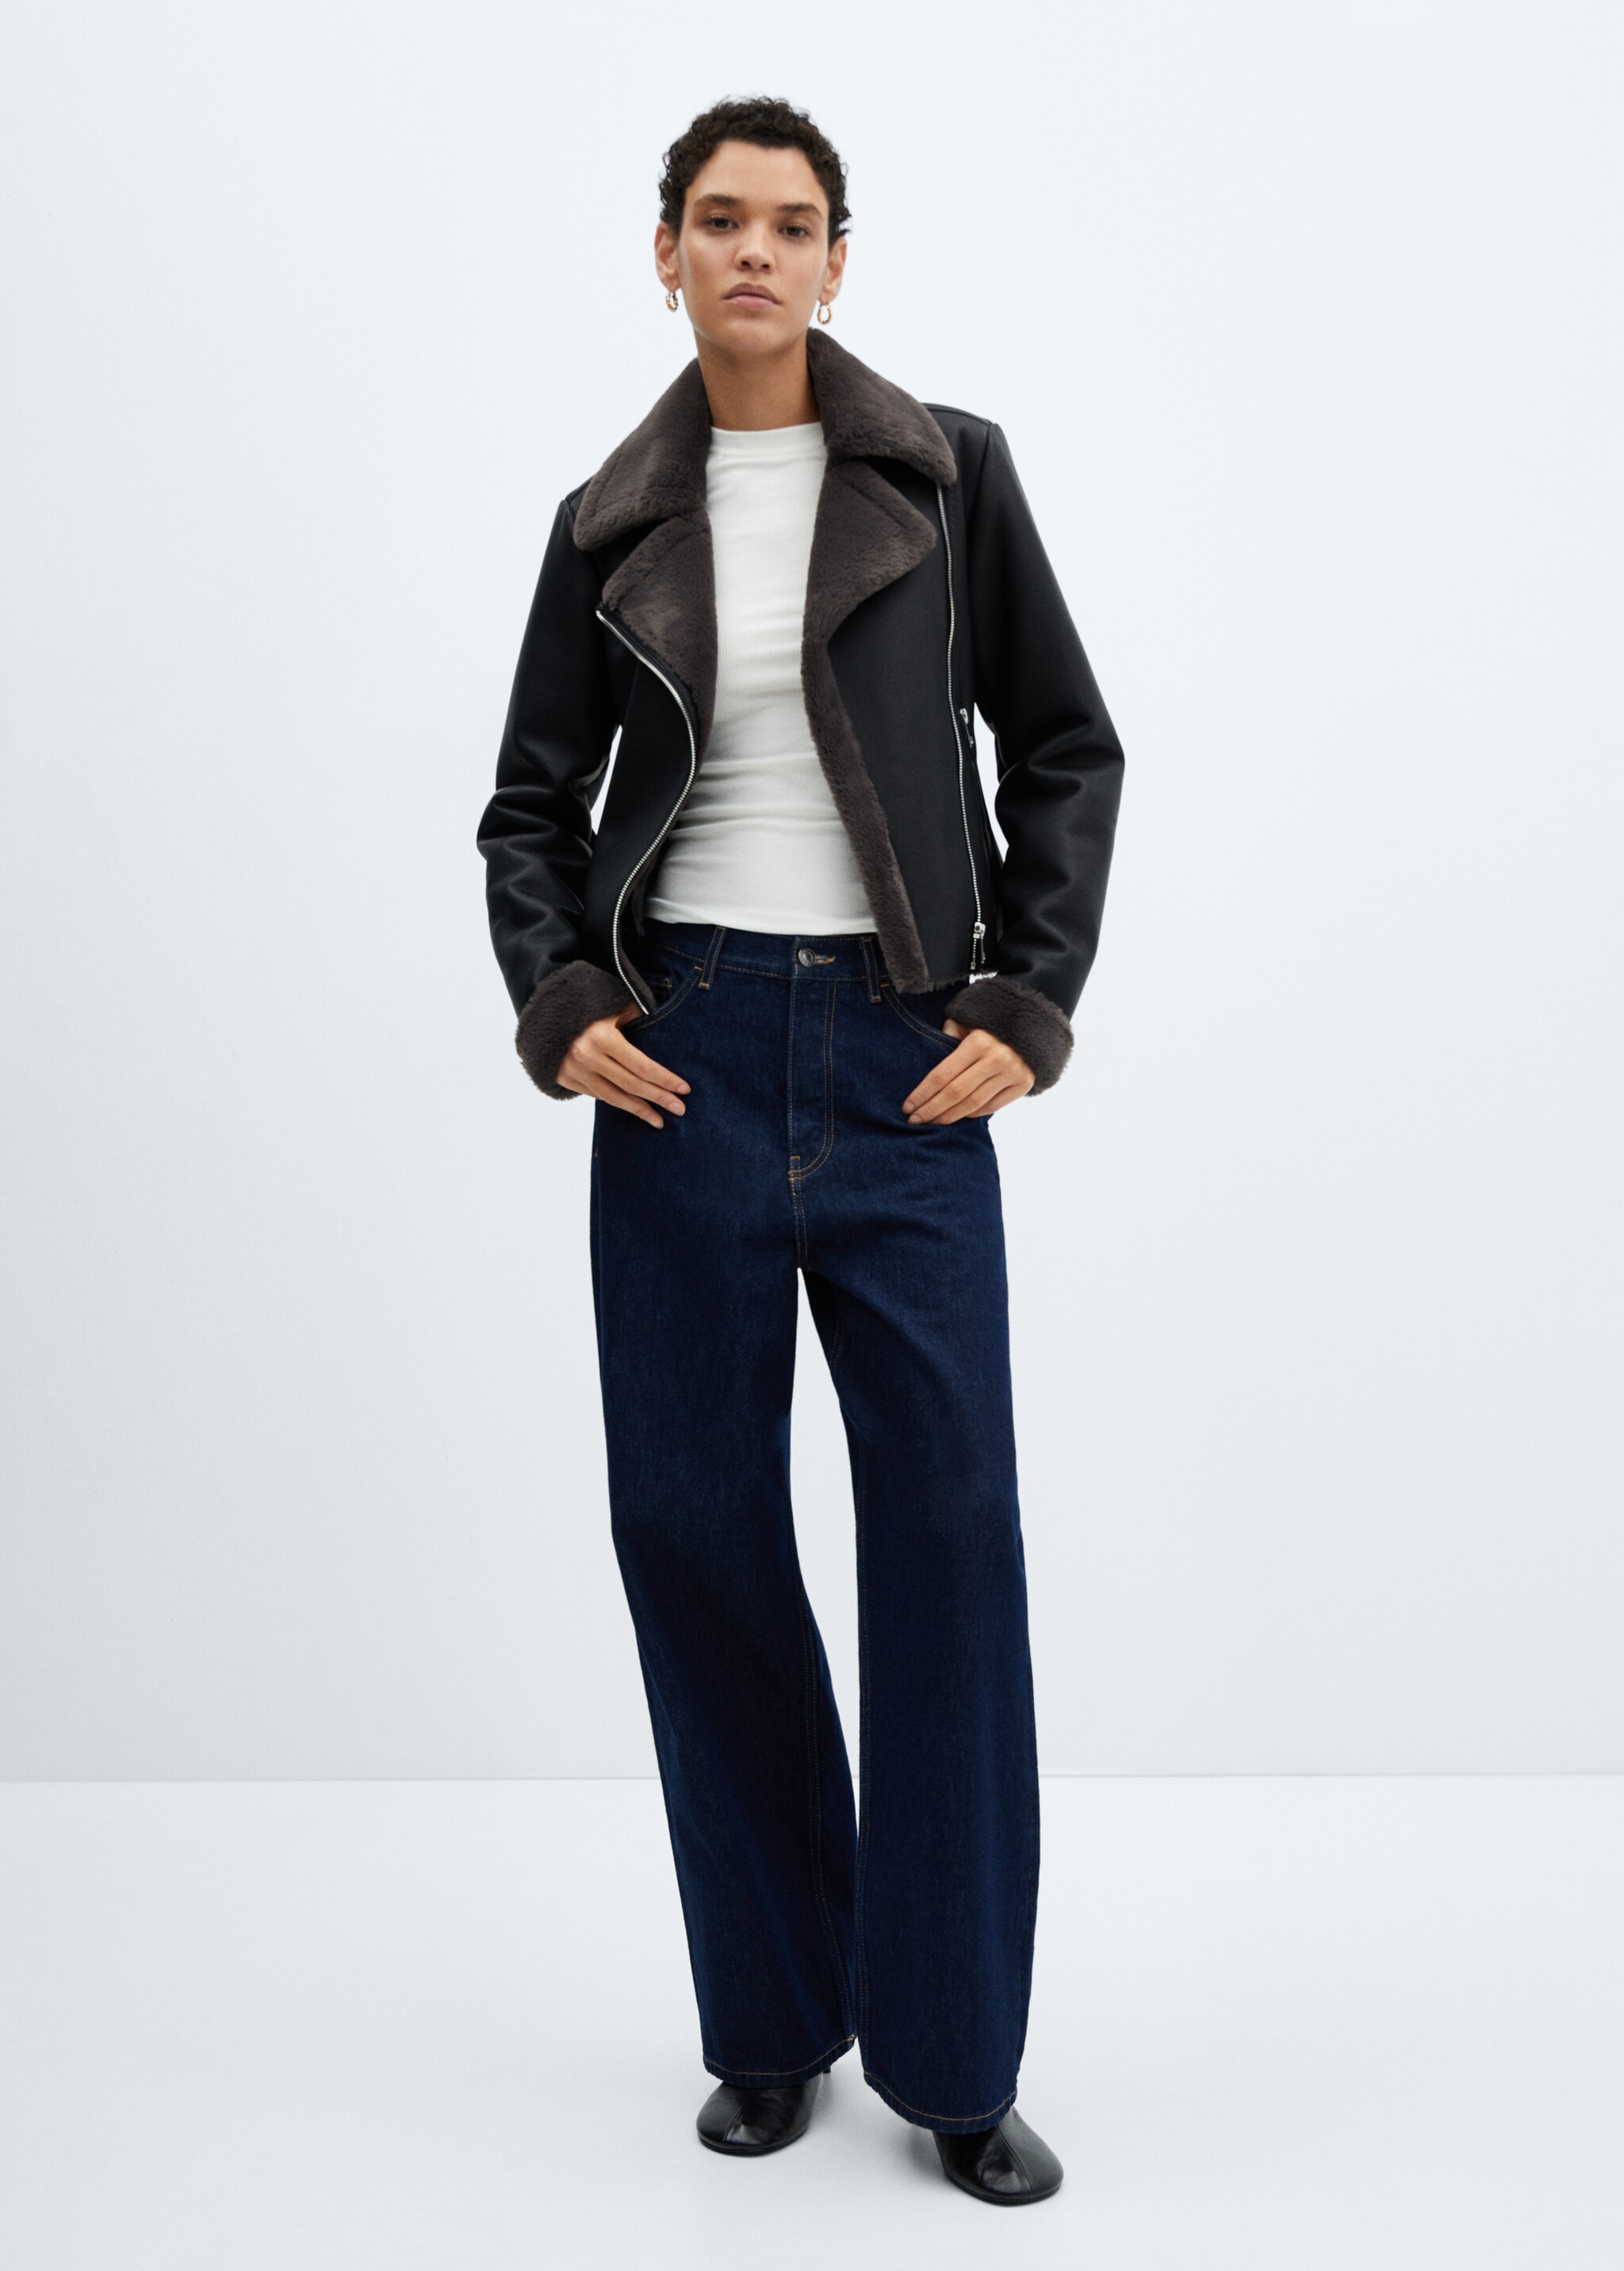 Faux shearling-lined jacket - General plane